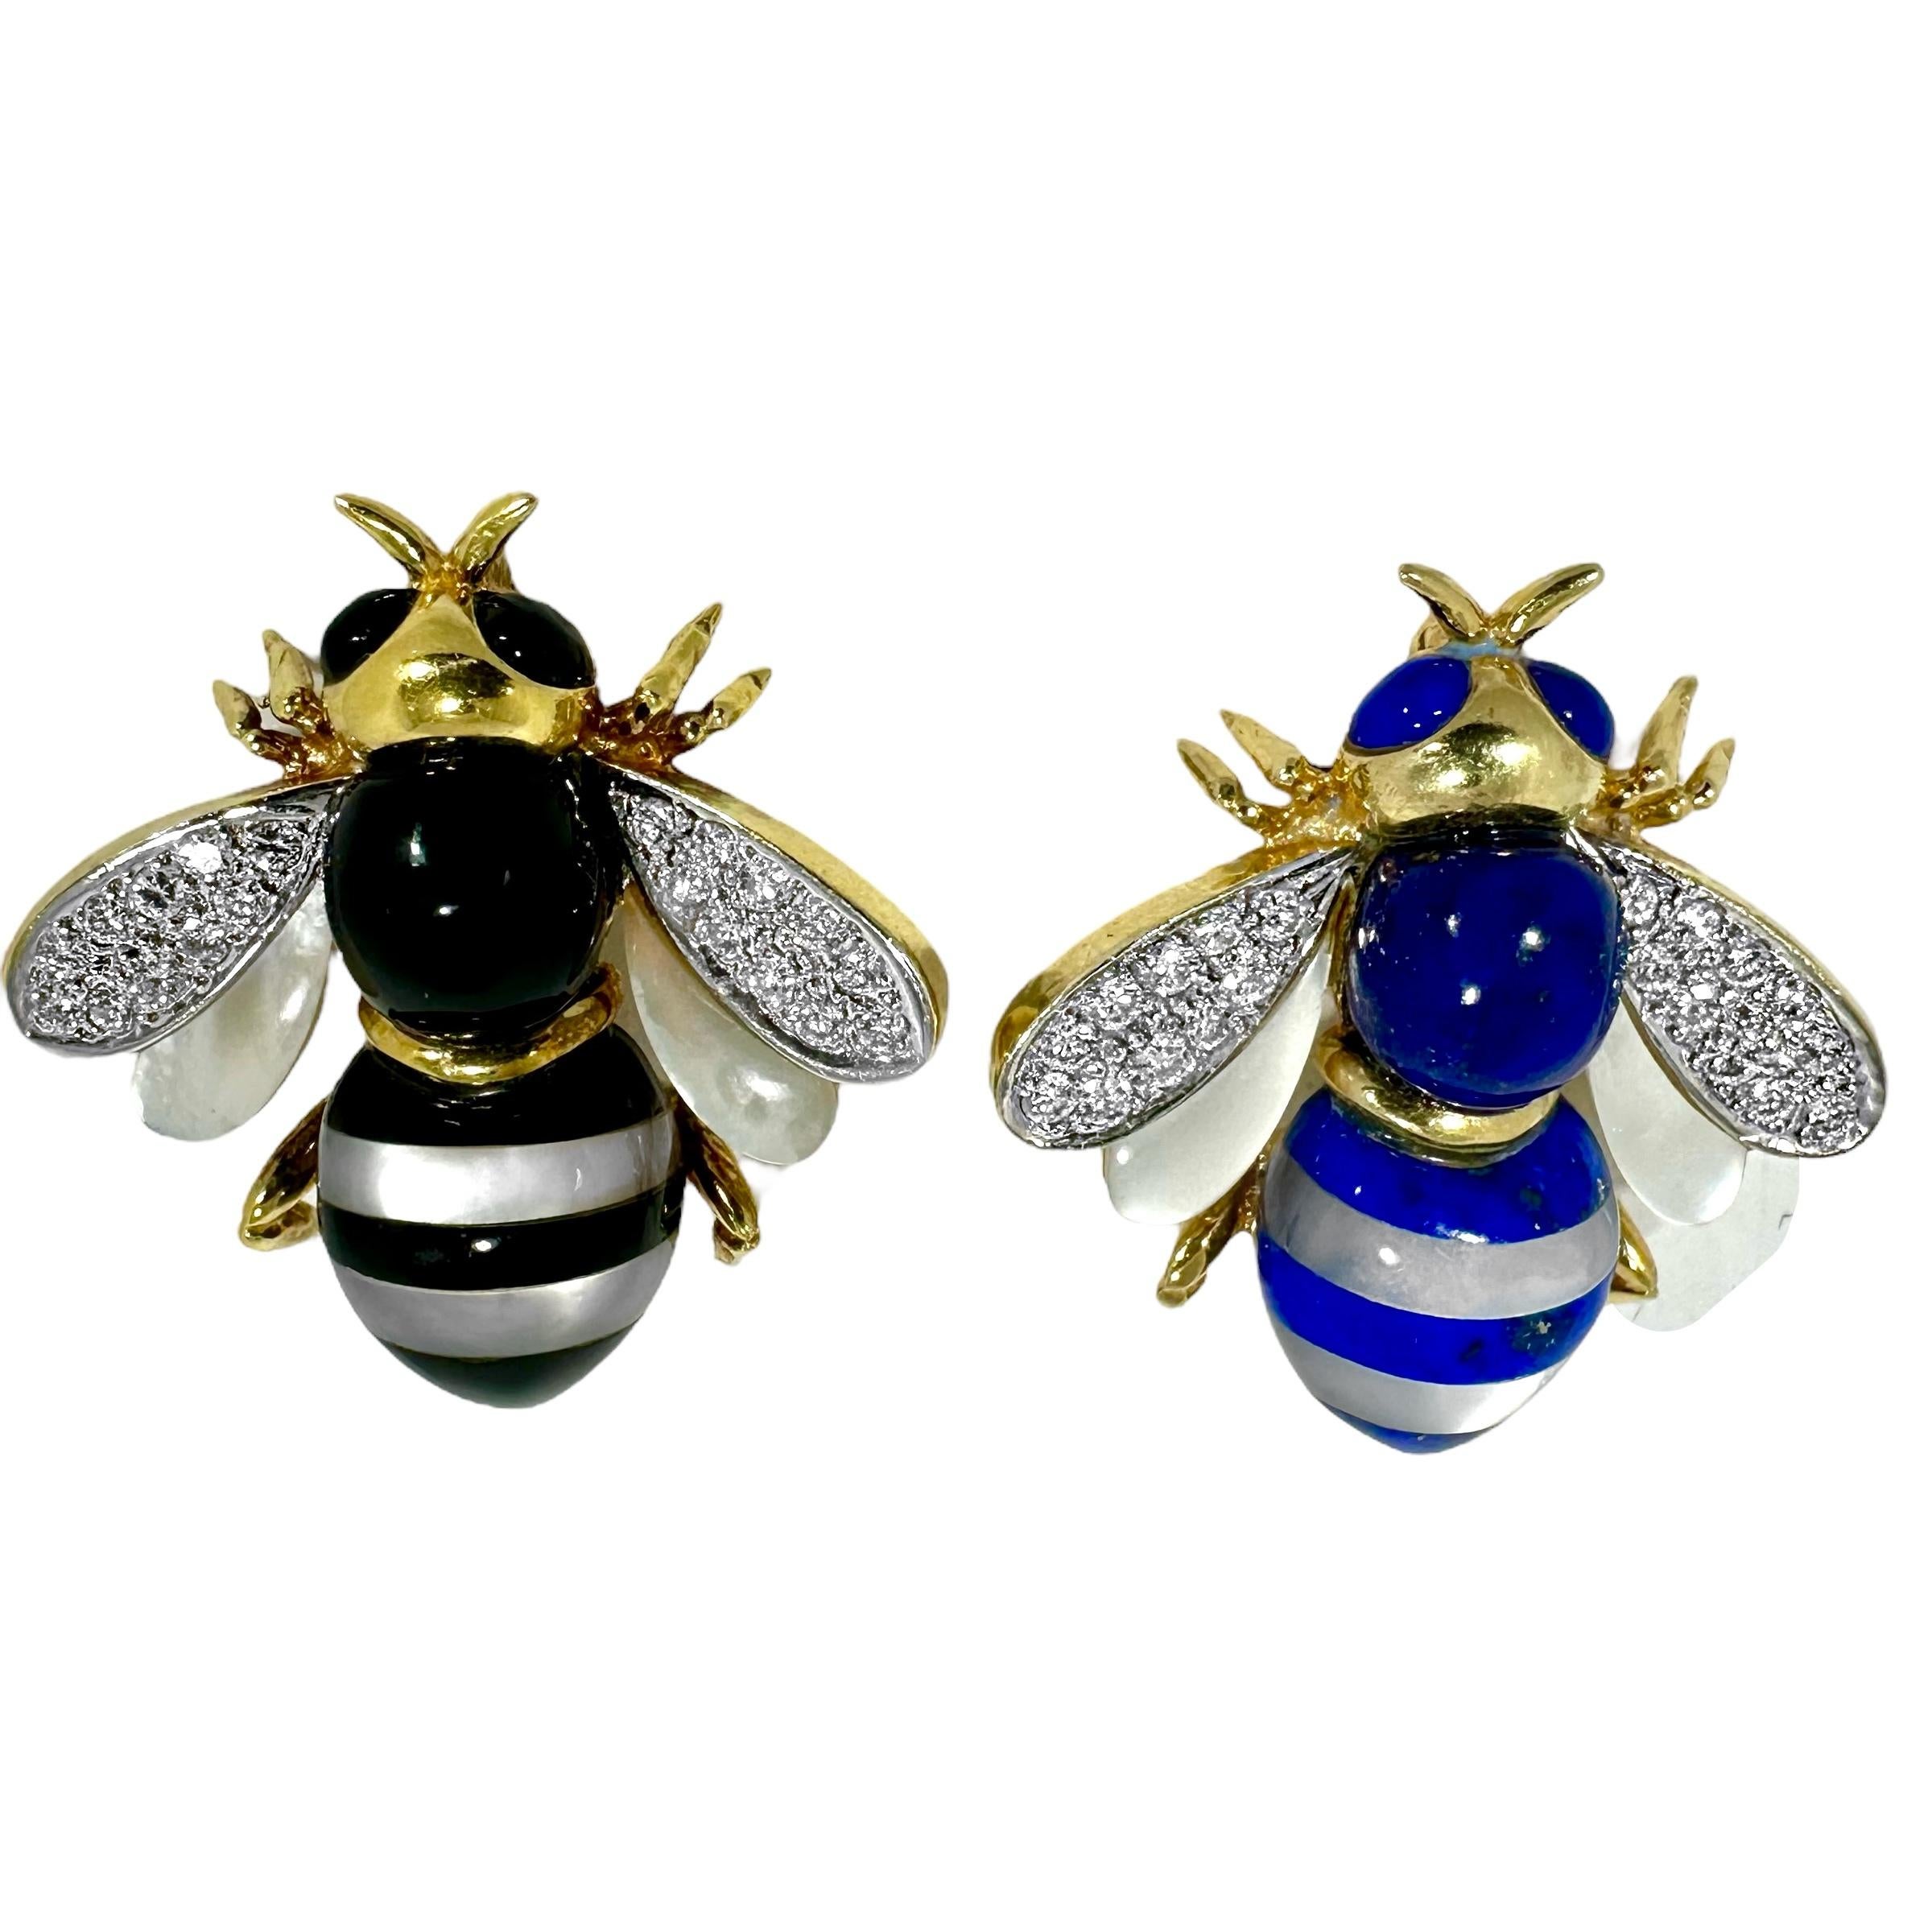 This delightful pair of Bumble Bee brooches were crafted by highly regarded designing jeweler, Asch Grossbardt. The specialty of this particular firm is intricate hard stone inlay, which is on prominent display here. Vivid Lapis-Lazuli, black onyx